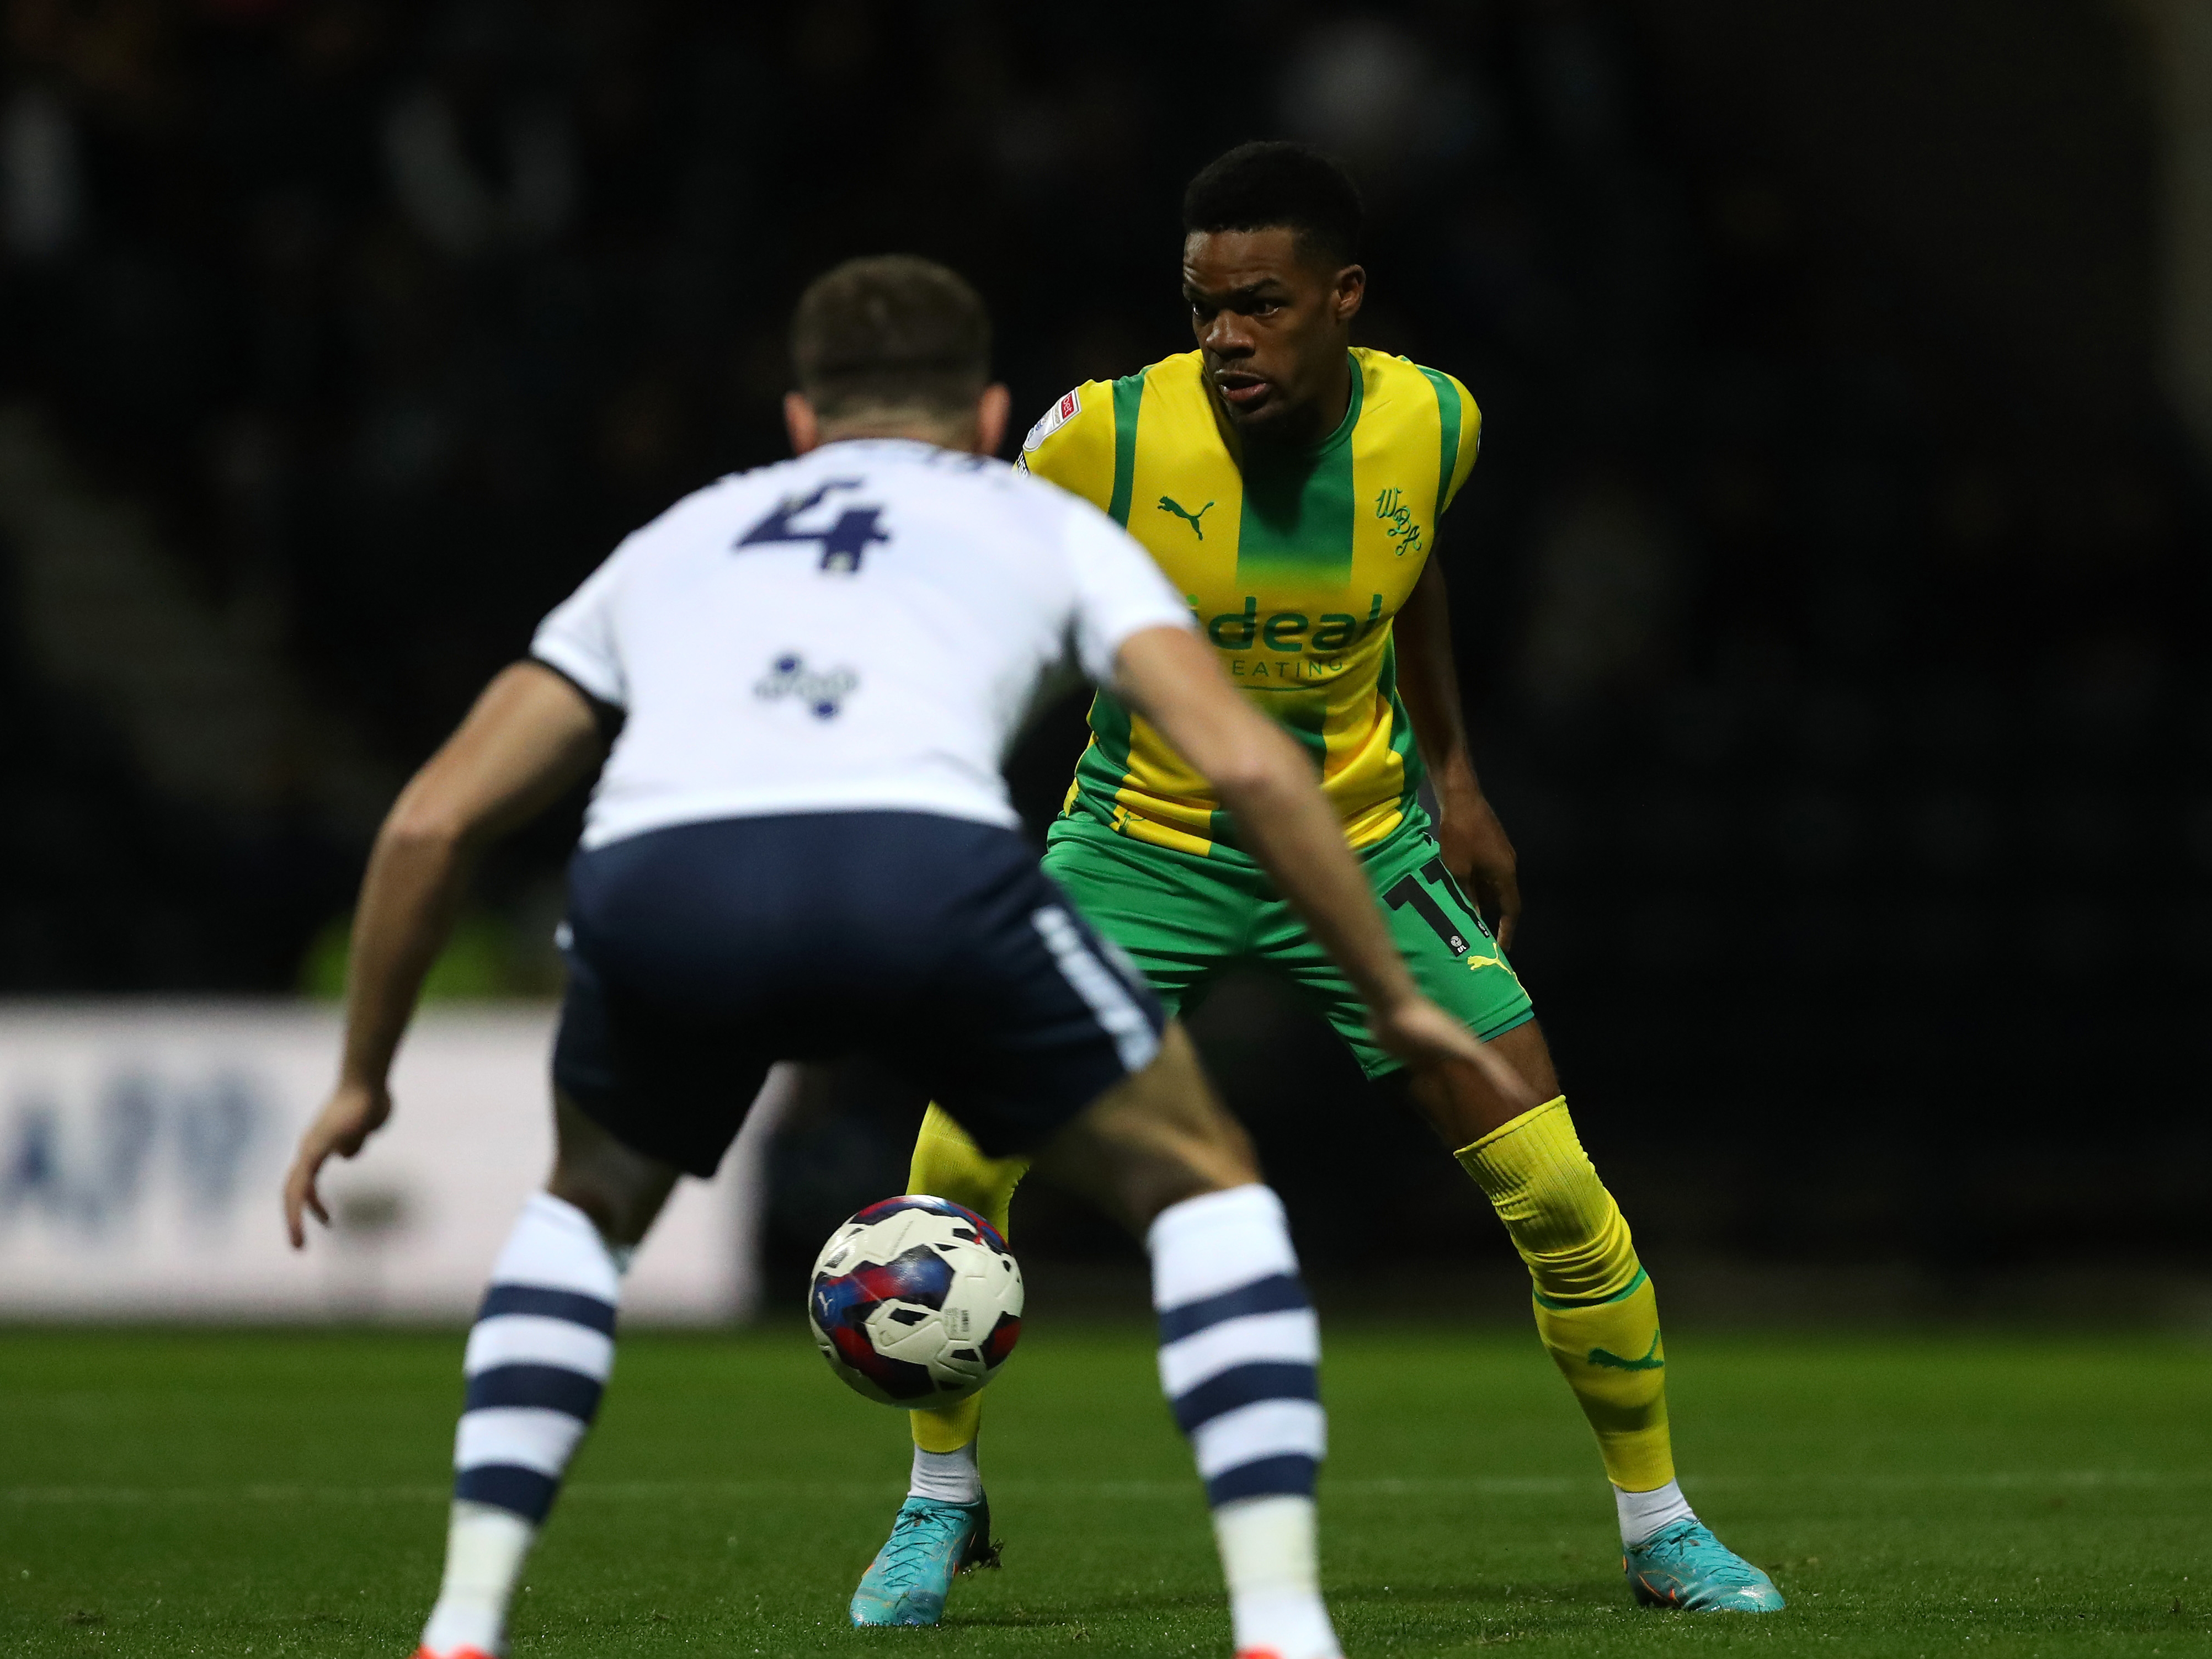 An image of Grady Diangana in action against Preston North End